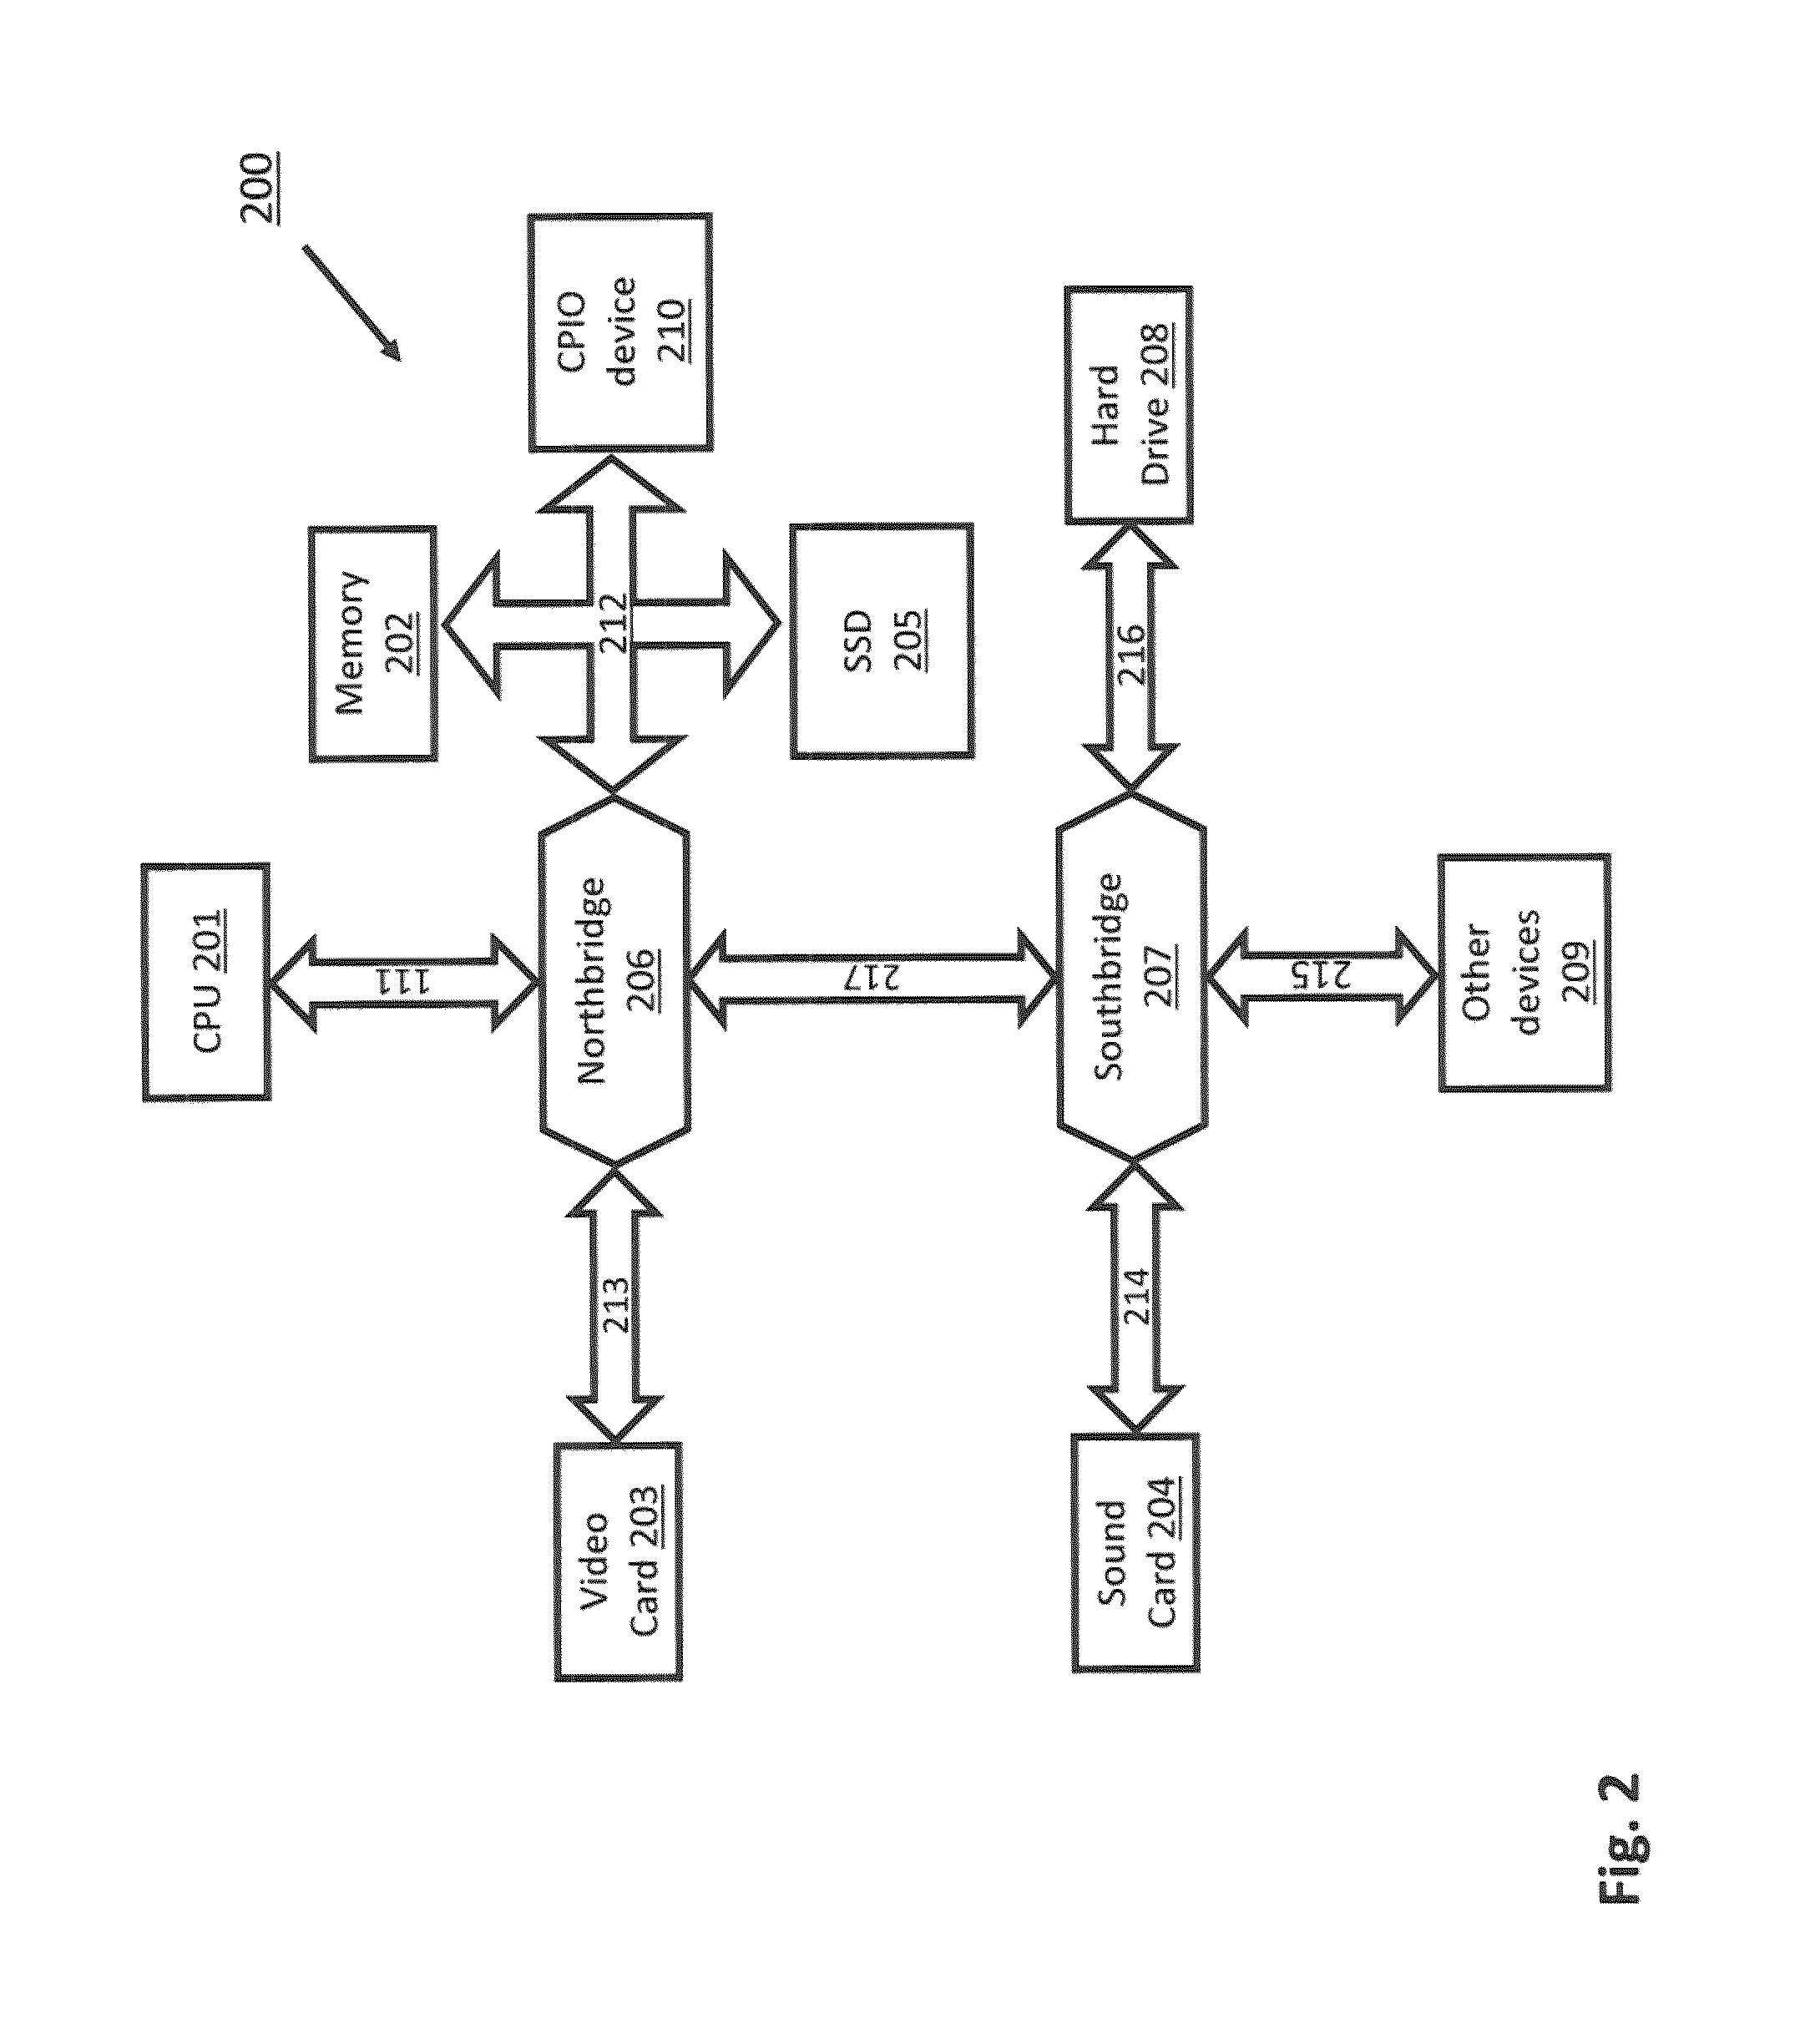 System and method of interfacing co-processors and input/output devices via a main memory system